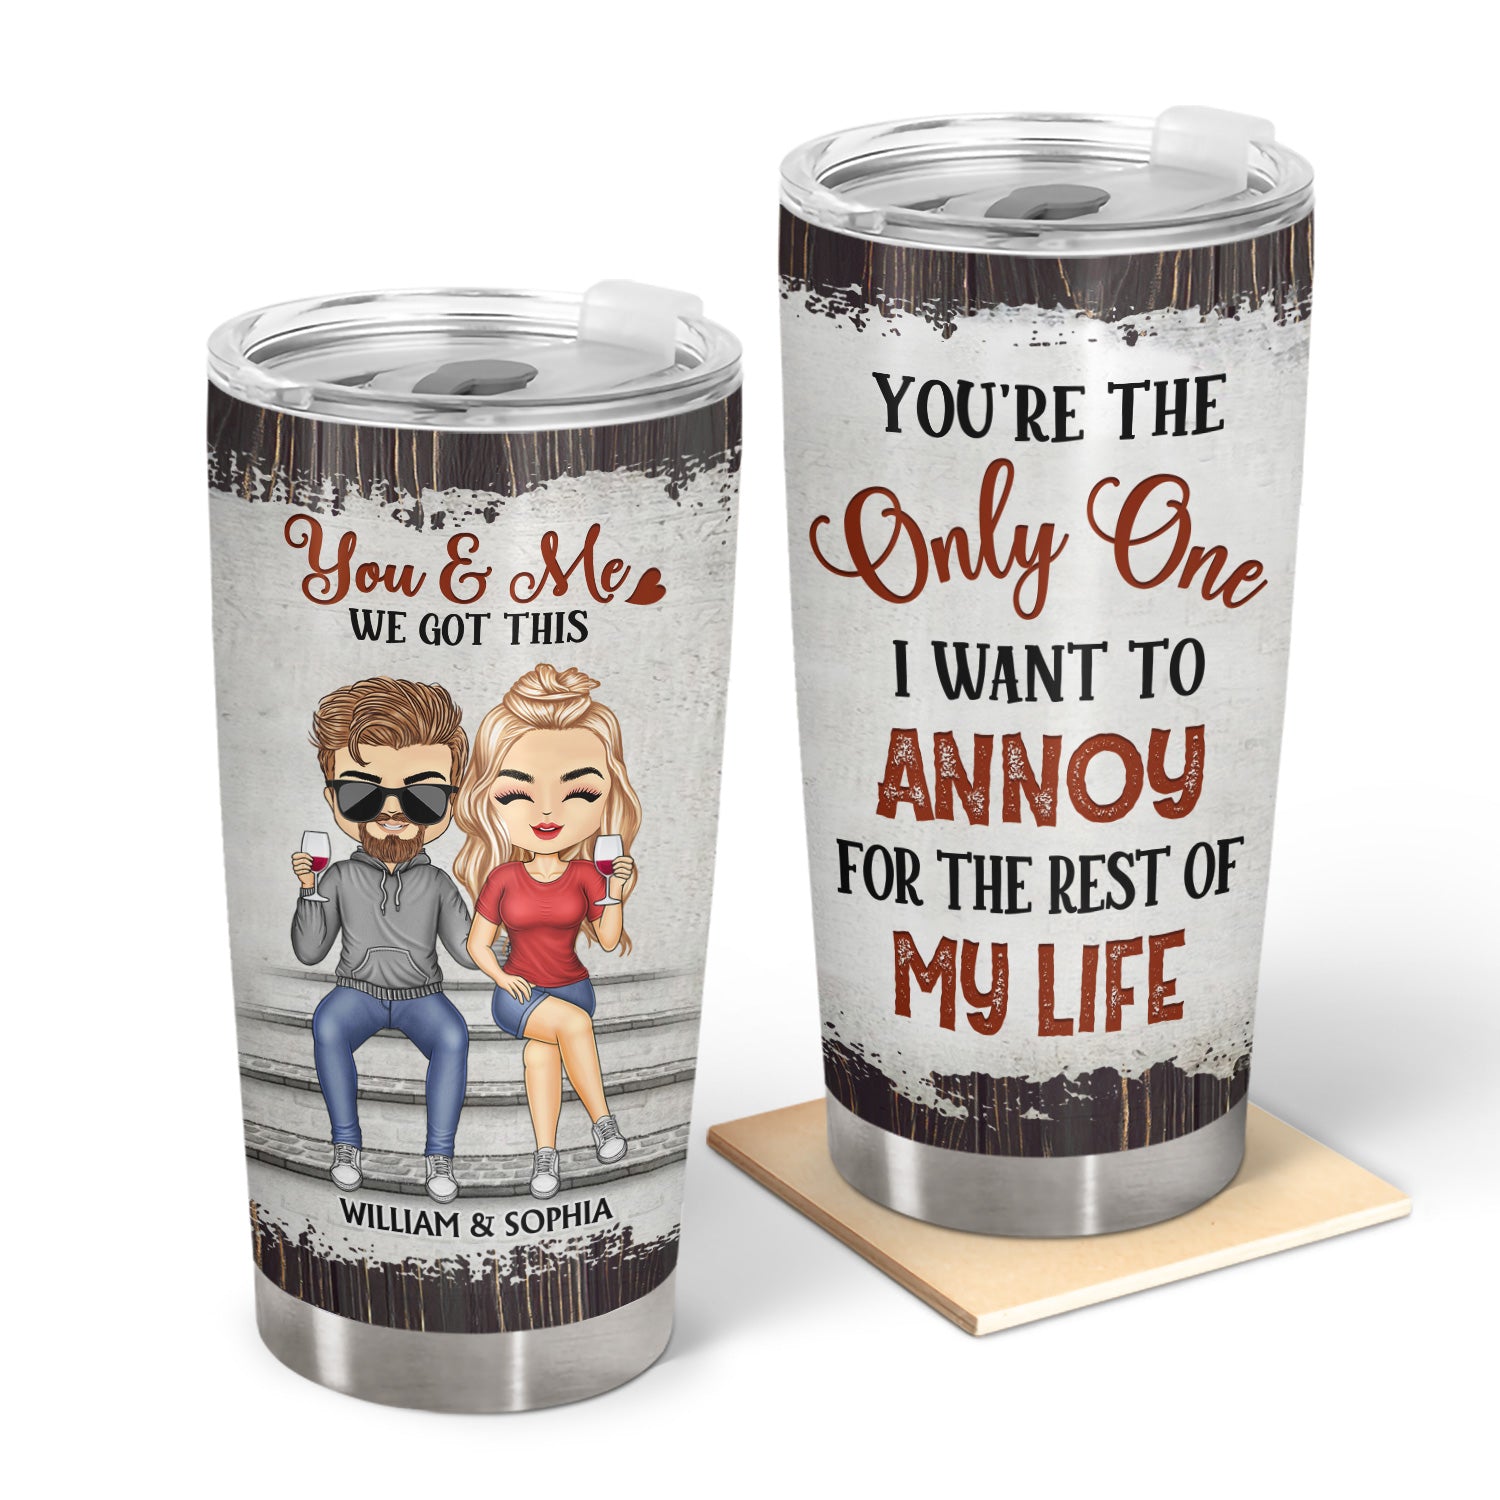 You‘re The Only One I Want To Annoy For The Rest Of My Life Couples Wood Pattern - Anniversary, Birthday Gift For Spouse, Husband, Wife, Boyfriend, Girlfriend - Personalized Custom Tumbler